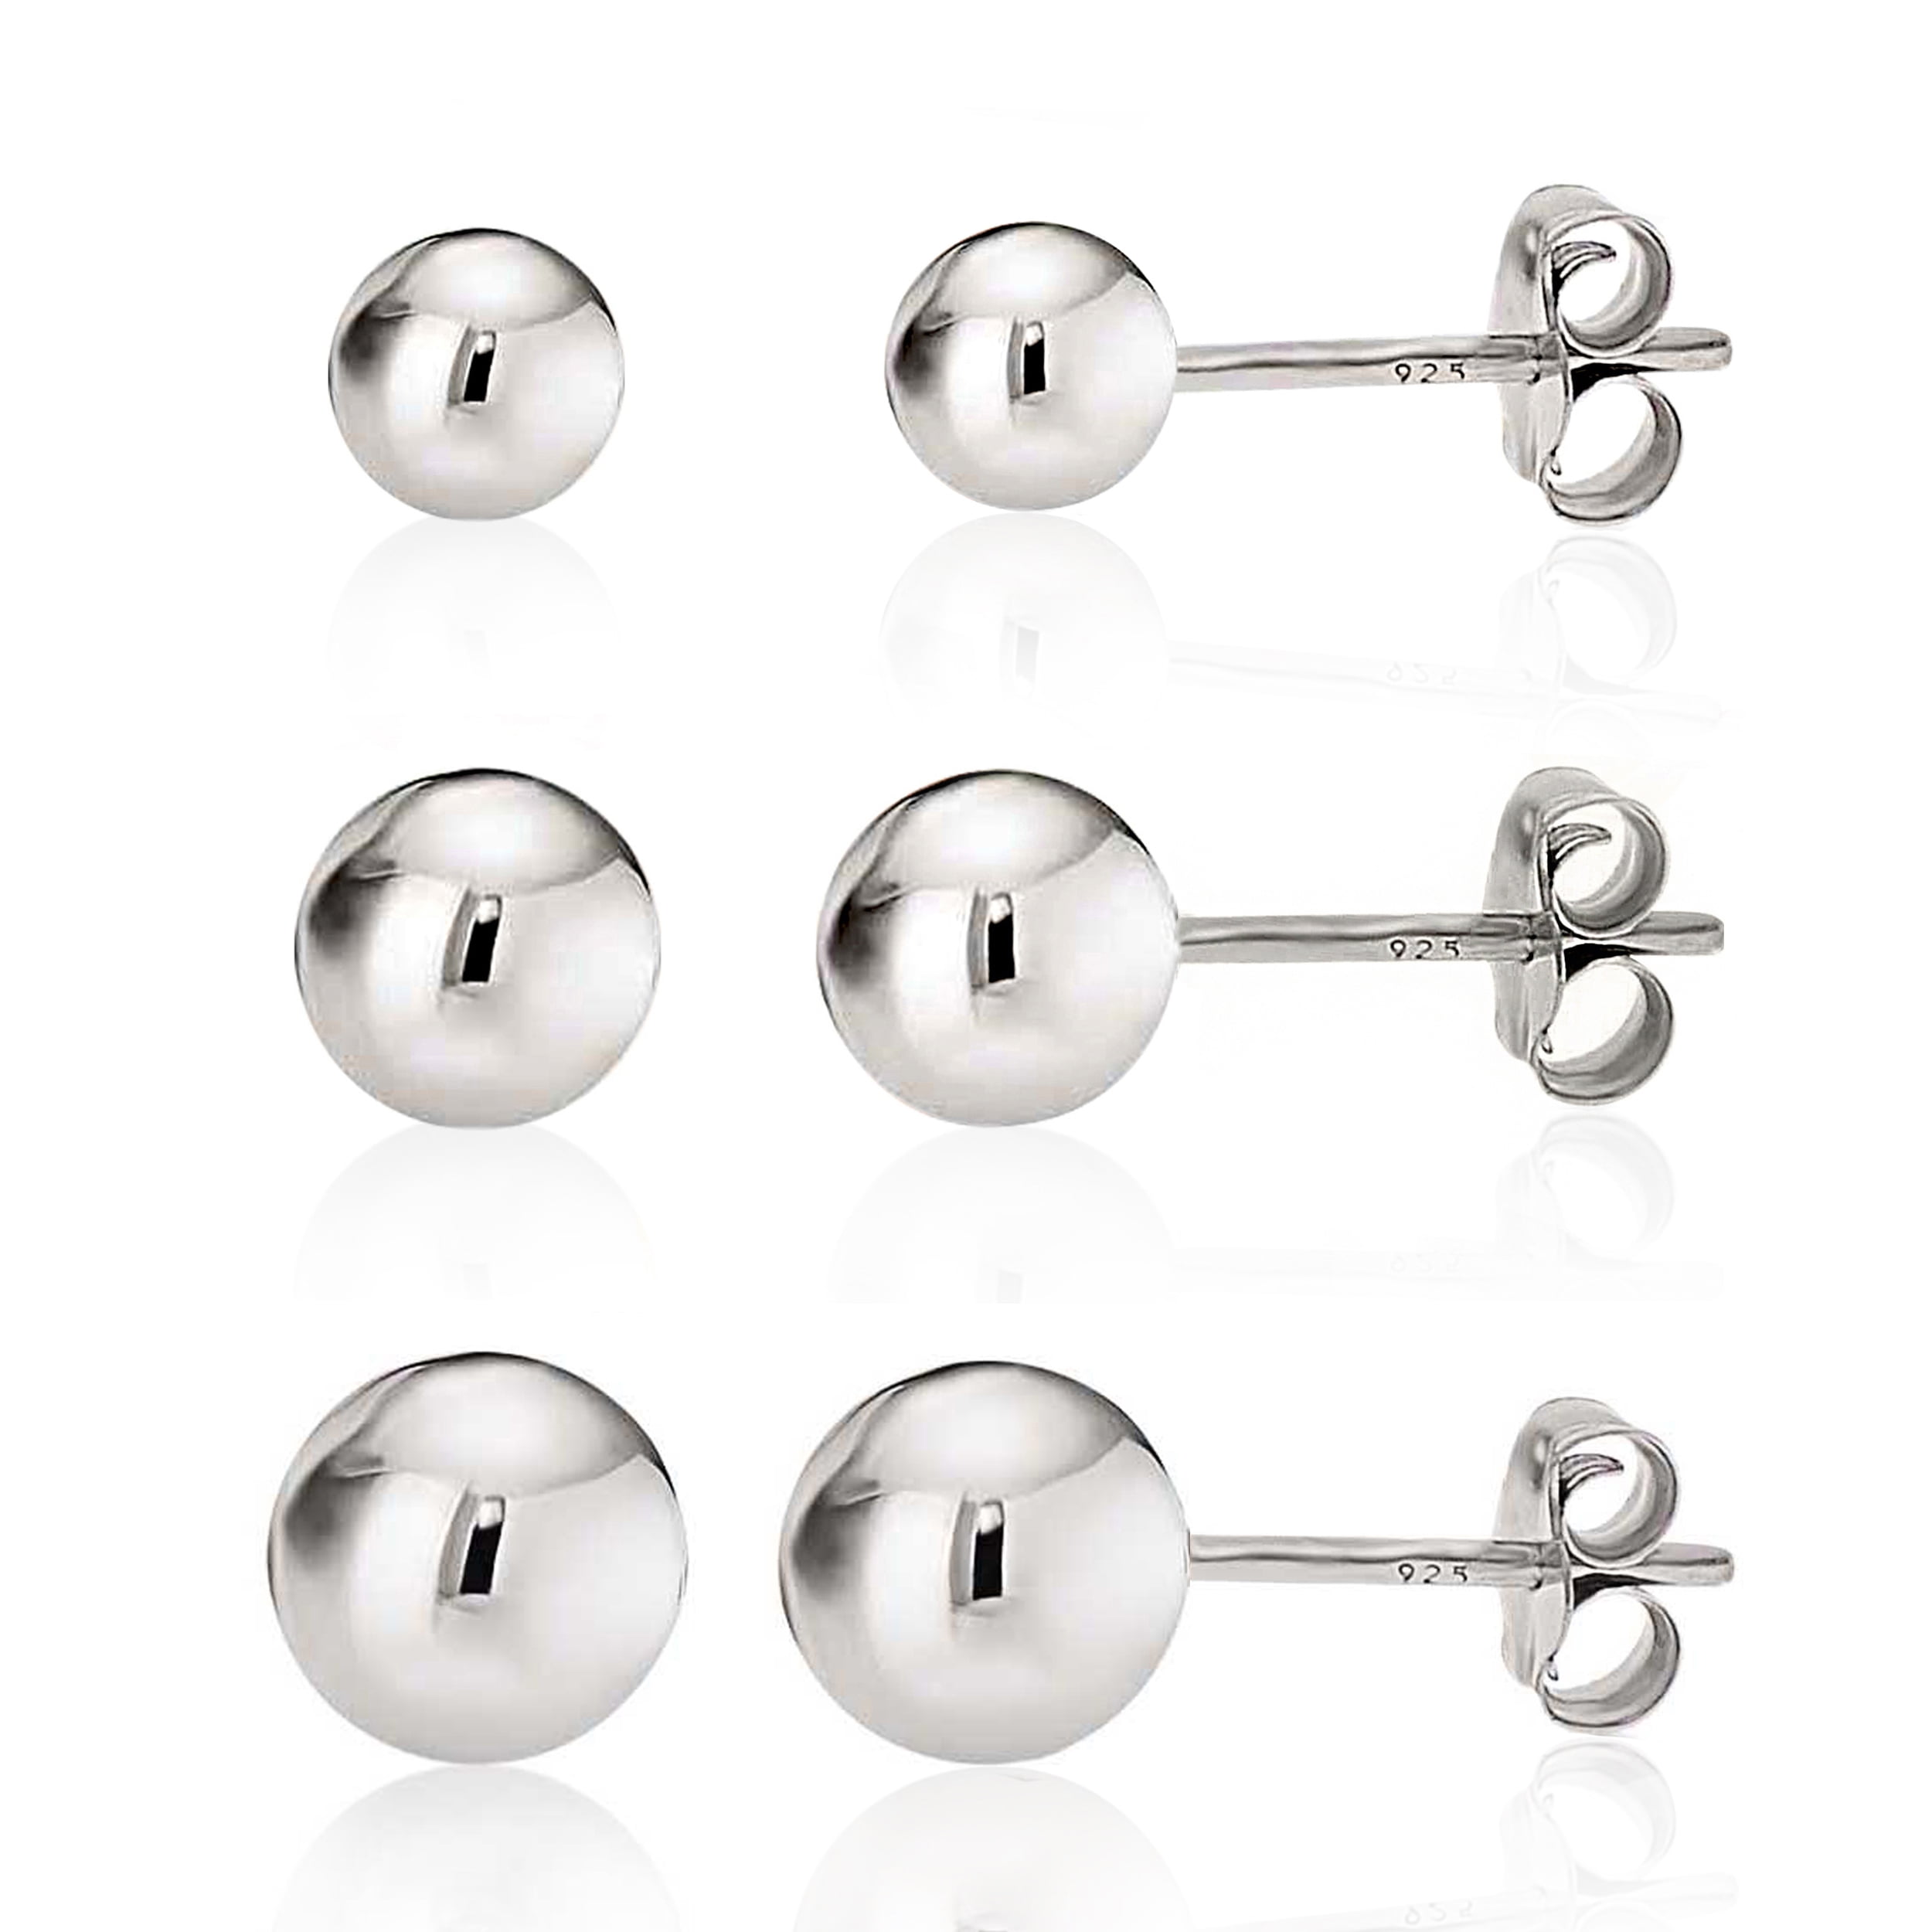 925 Solid Sterling Silver Small White Pearl Ball Ear Studs Earrings 4mm 